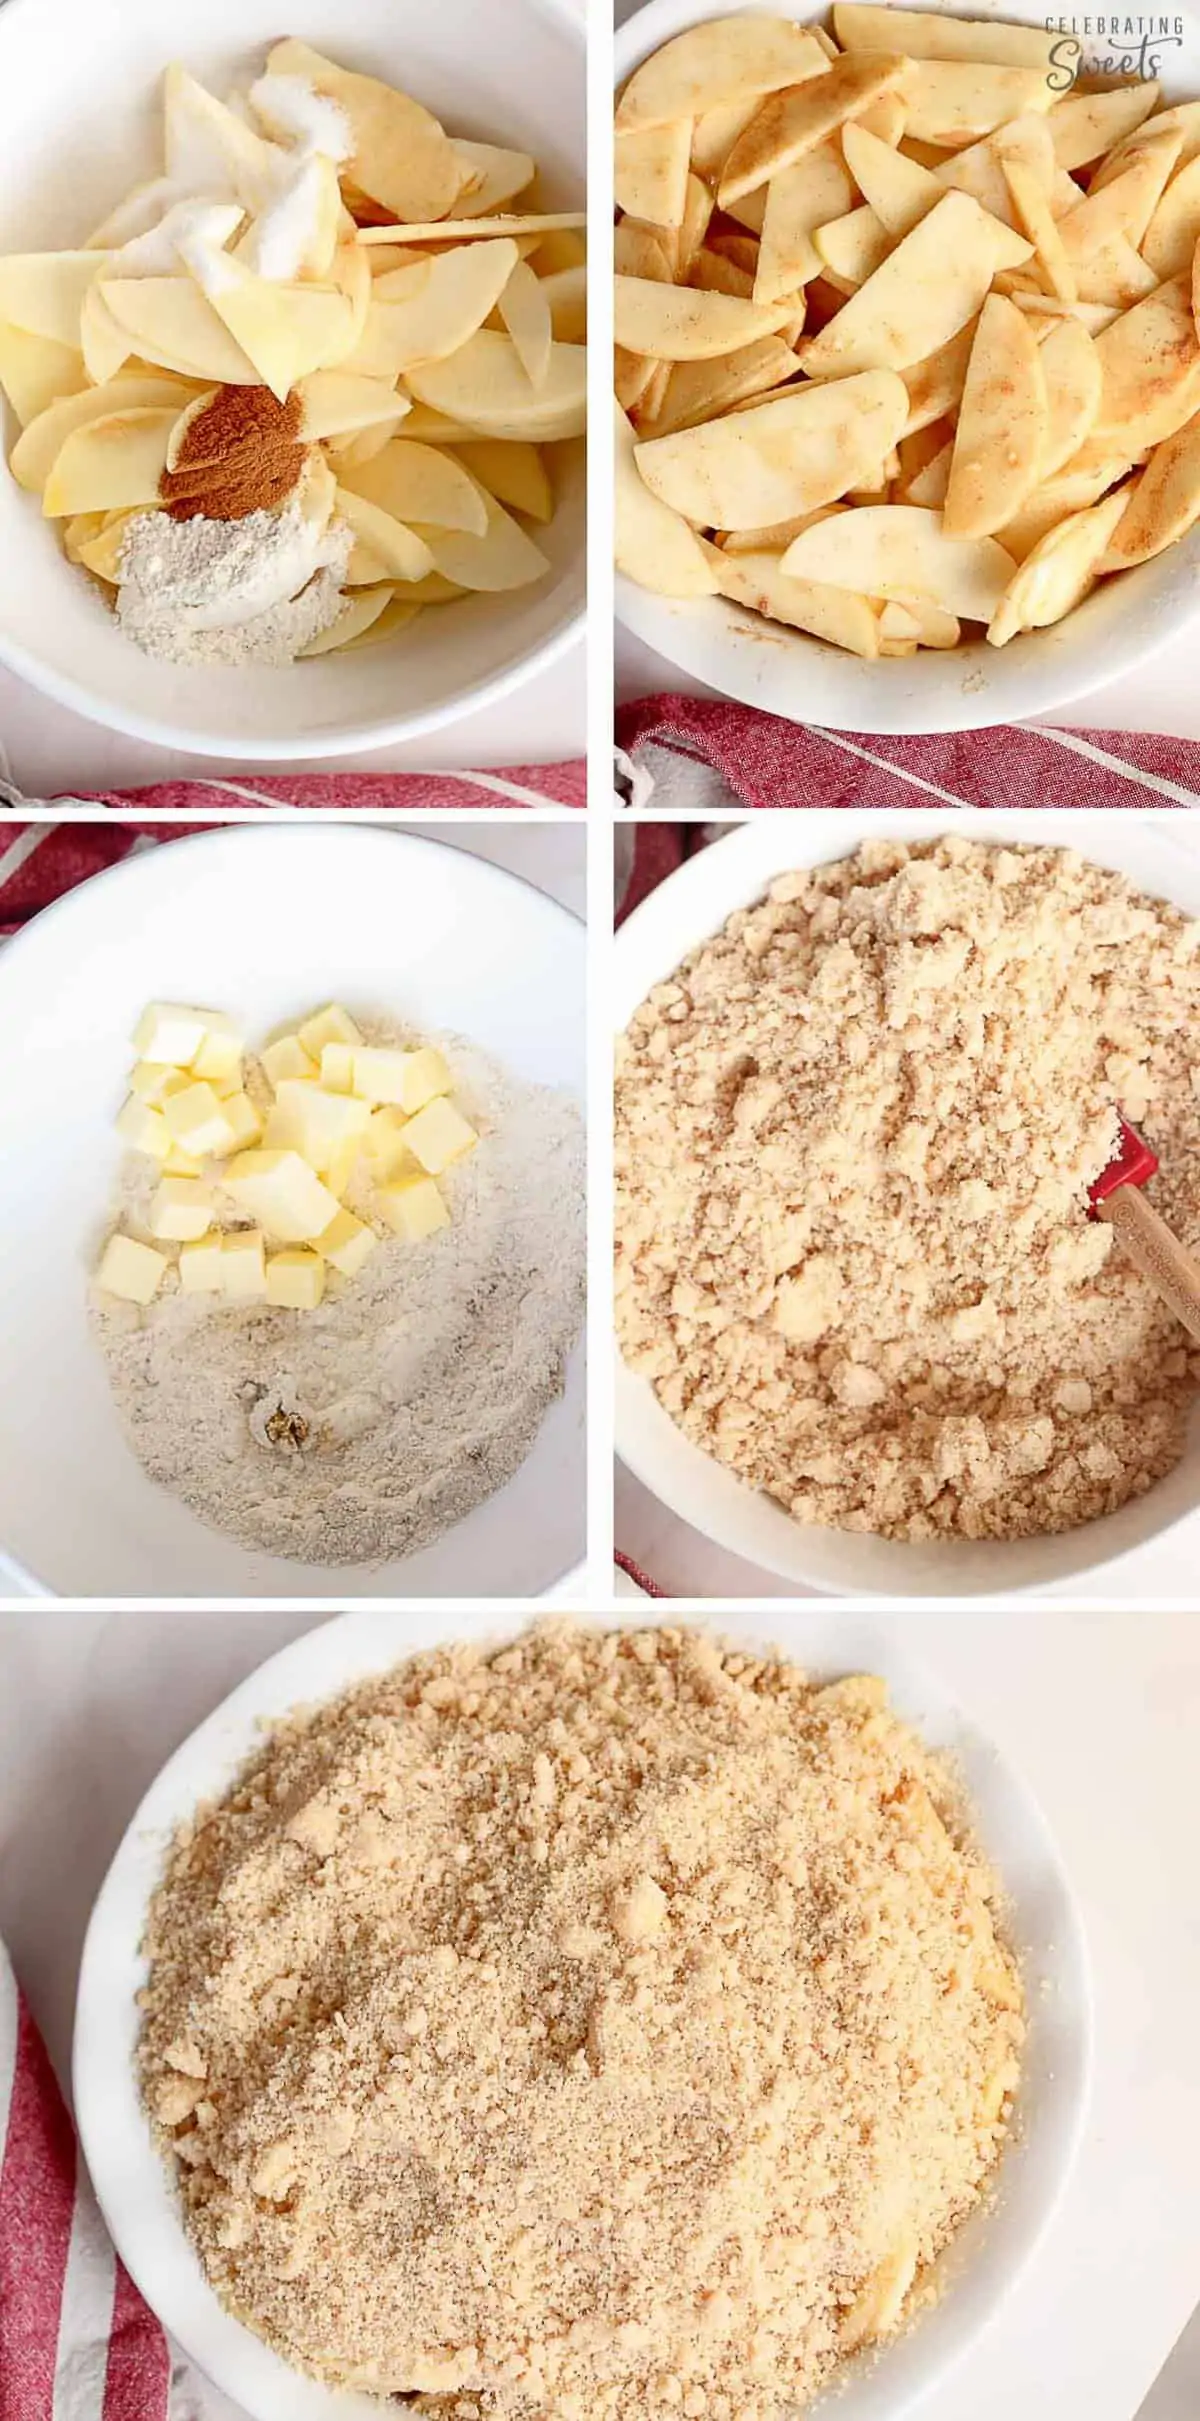 Collage how to make apple crumble: apples in a bowl, crumb topping in a bowl, apple crumble assembled in baking dish.